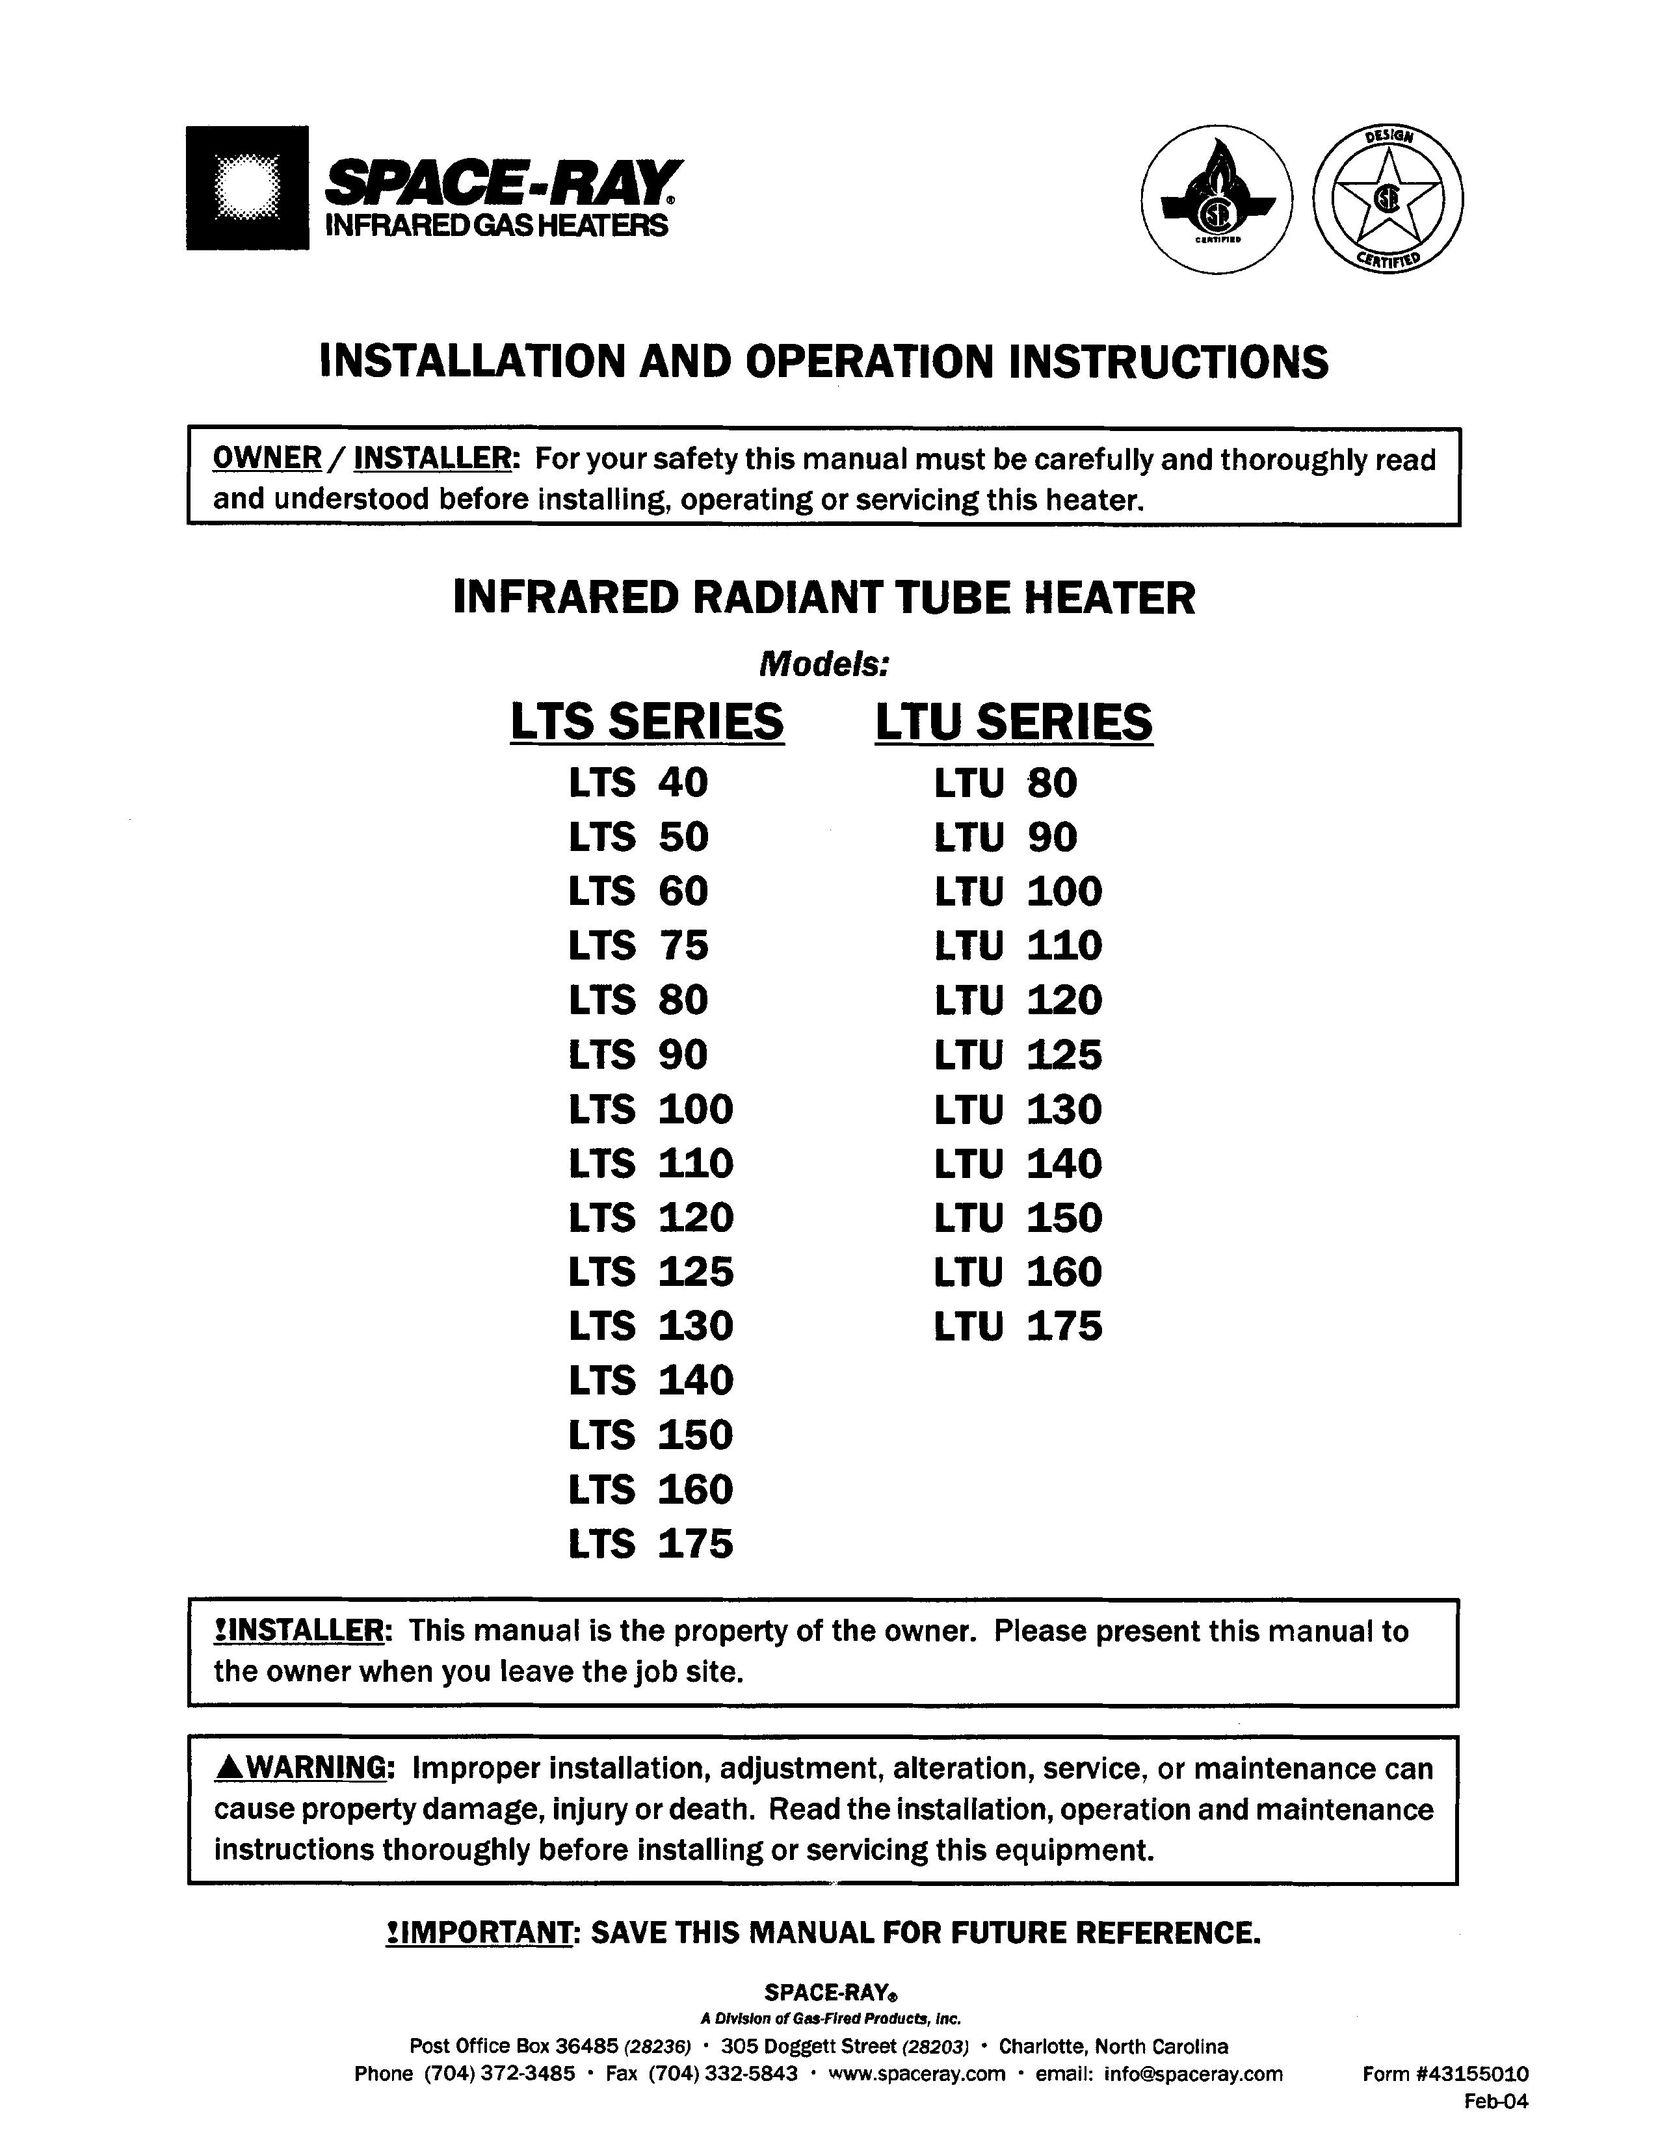 Gas-Fired Products LTU 150 Electric Heater User Manual